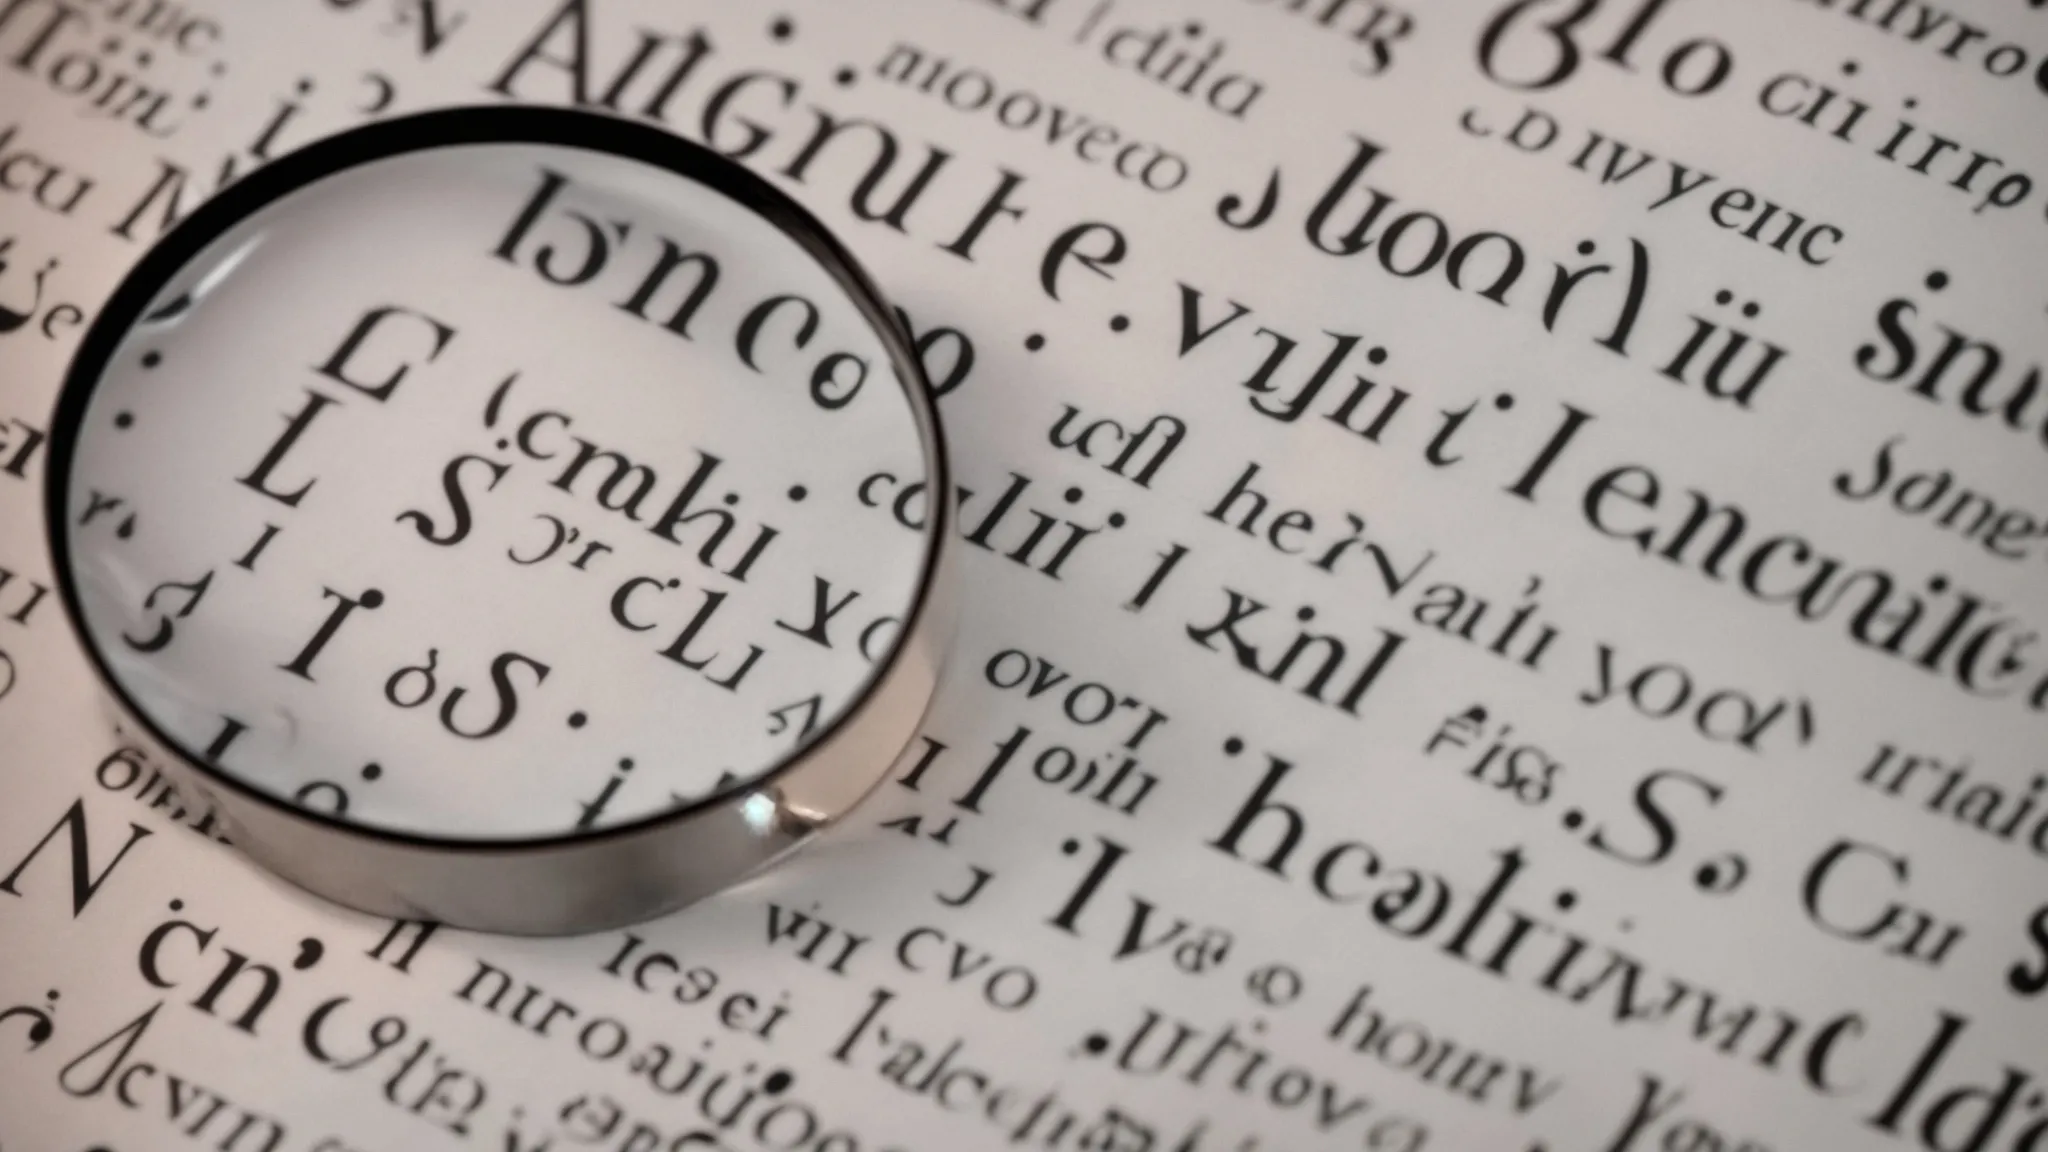 a close-up view of a magnifying glass focusing on the word "keywords" surrounded by other blurred seo-related words.